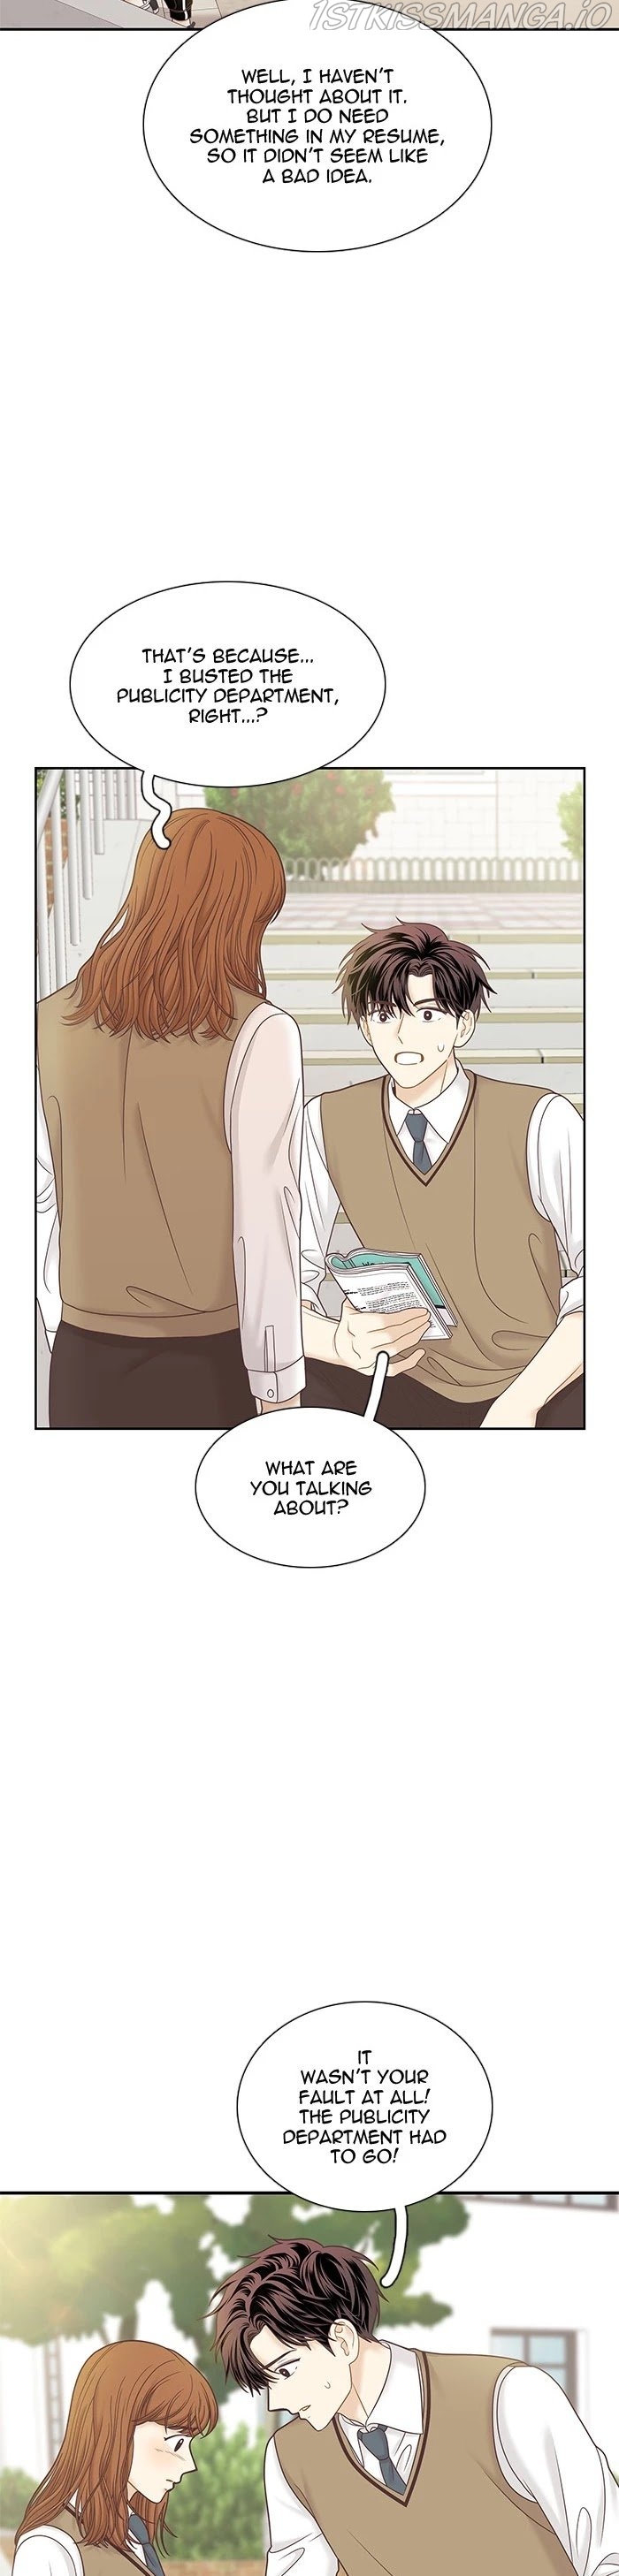 Girl’s World ( World of Girl ) Chapter 284 - Page 30